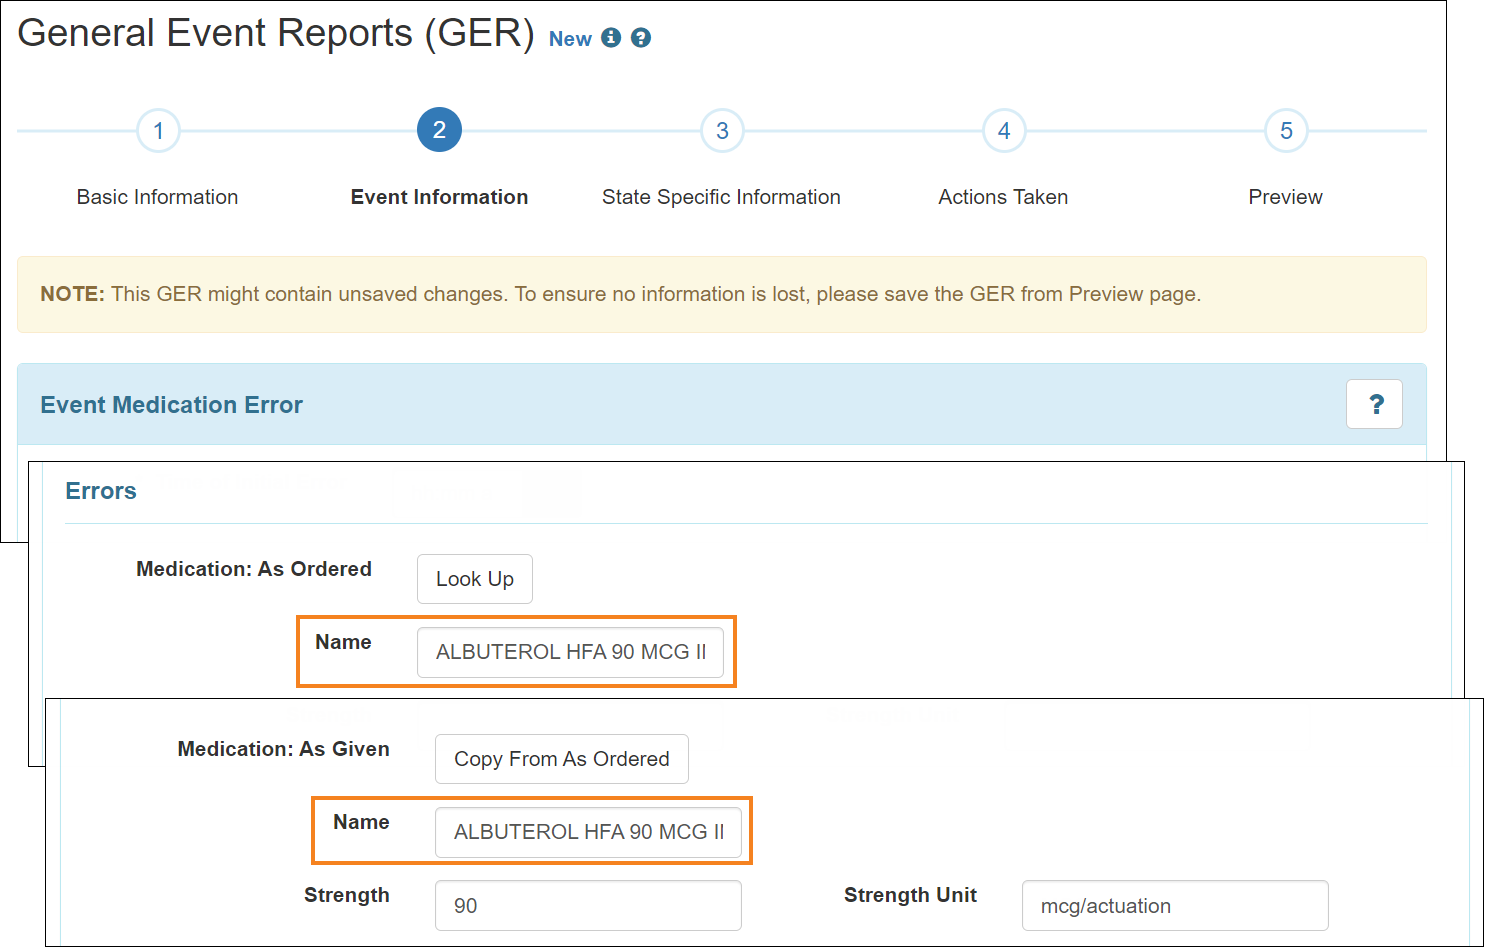 Screenshot showing the Medication Name fields in GER Med Error events